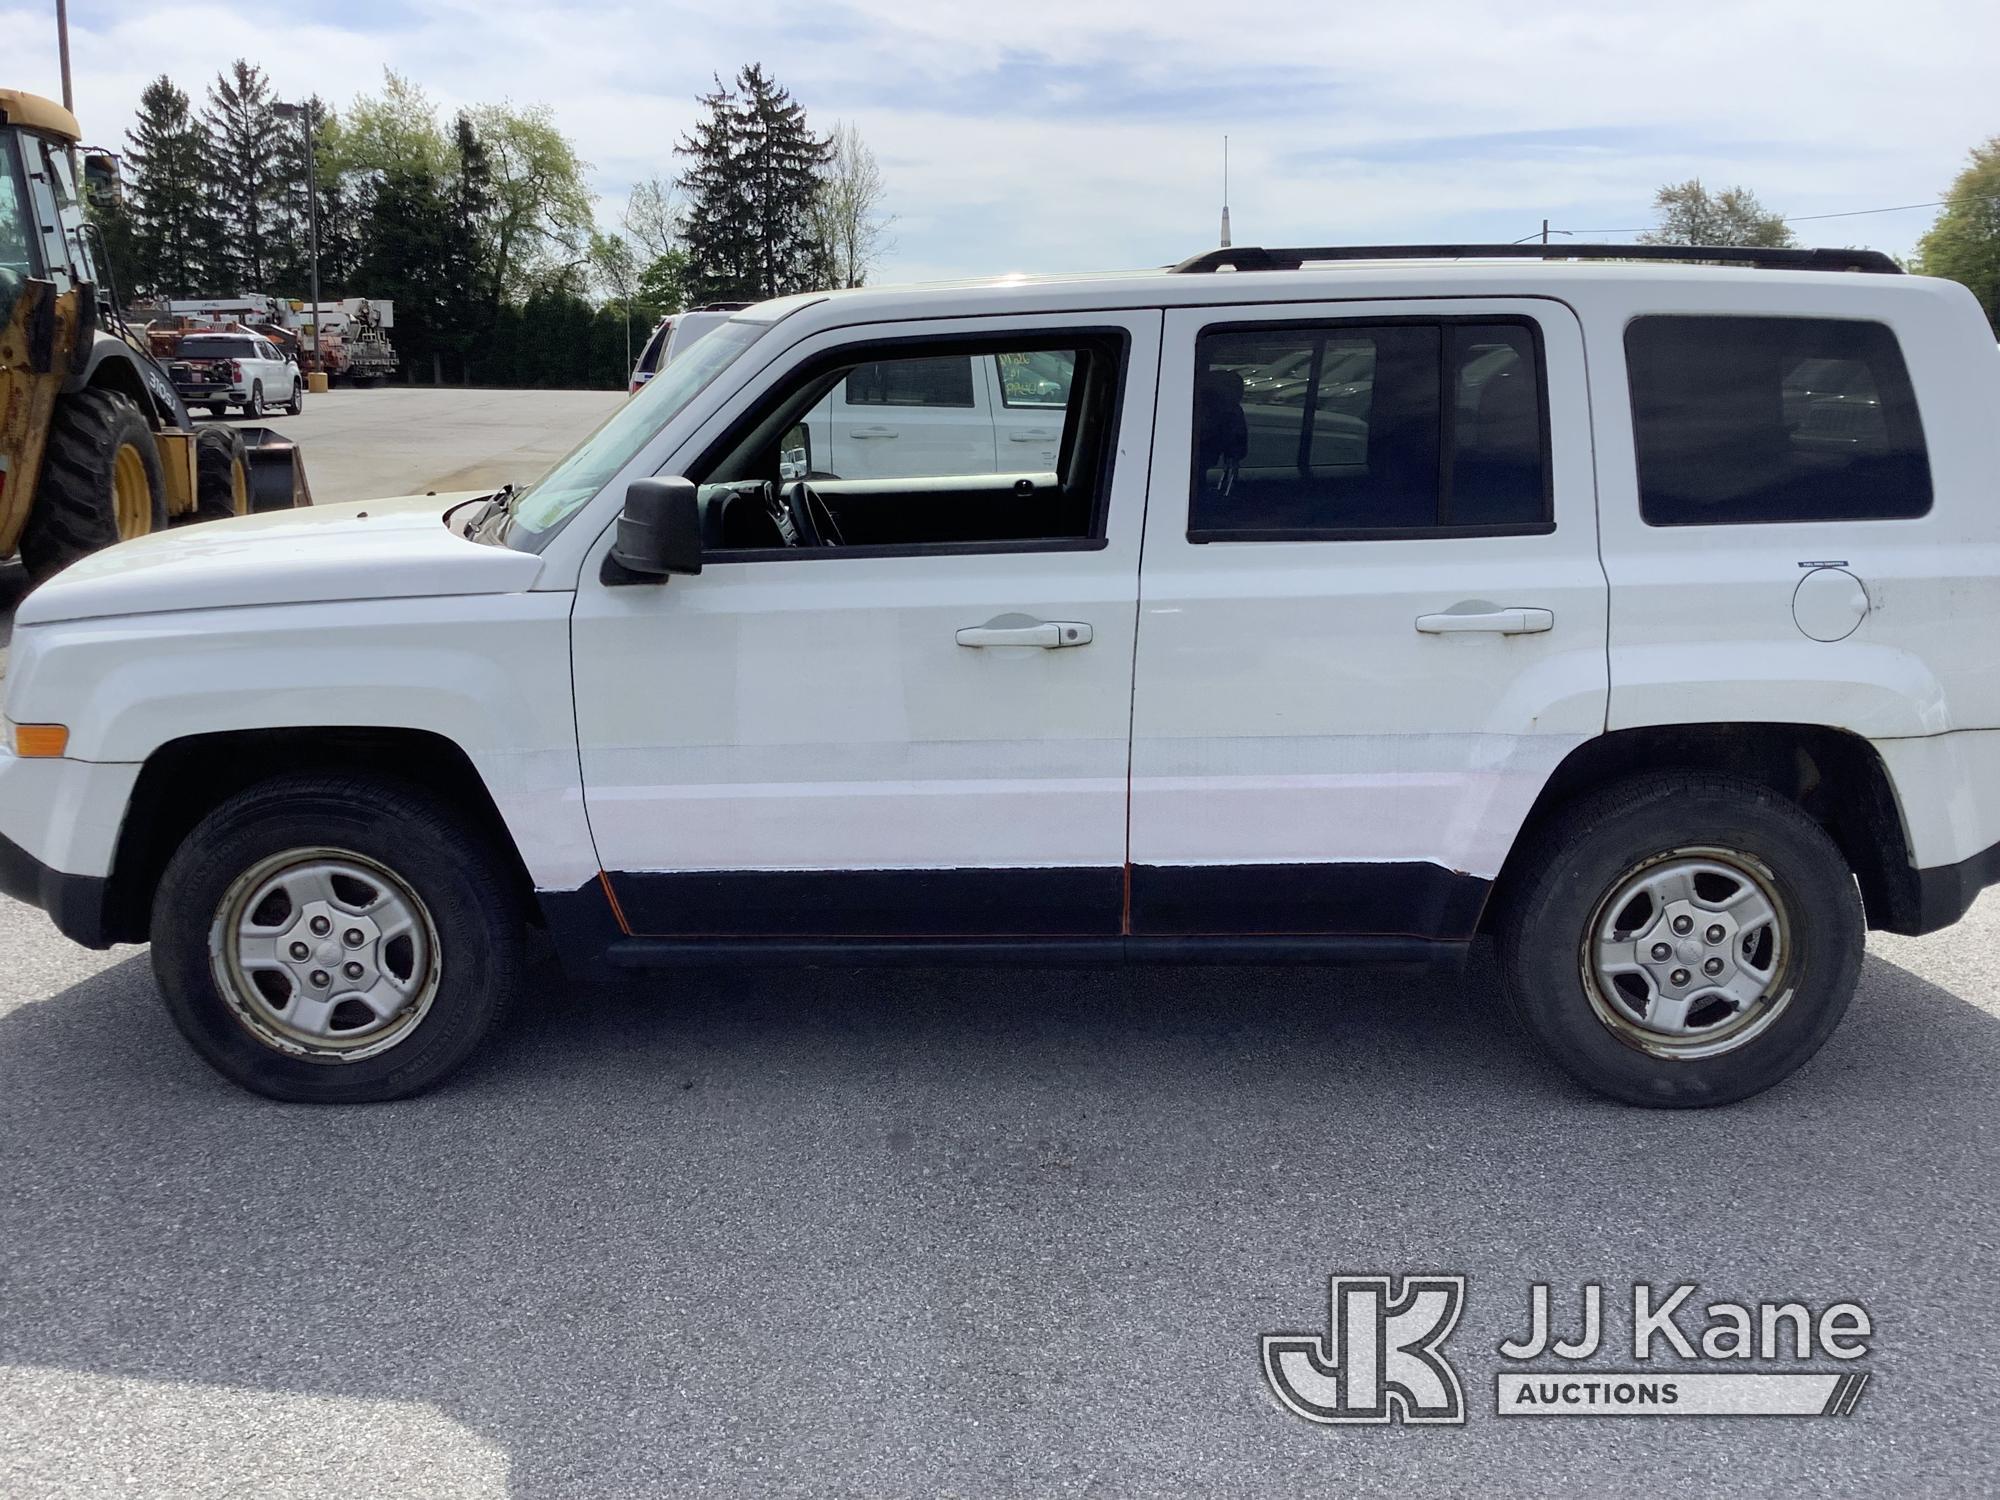 (Chester Springs, PA) 2012 Jeep Patriot 4x4 4-Door Sport Utility Vehicle Runs & Moves, Engine Light